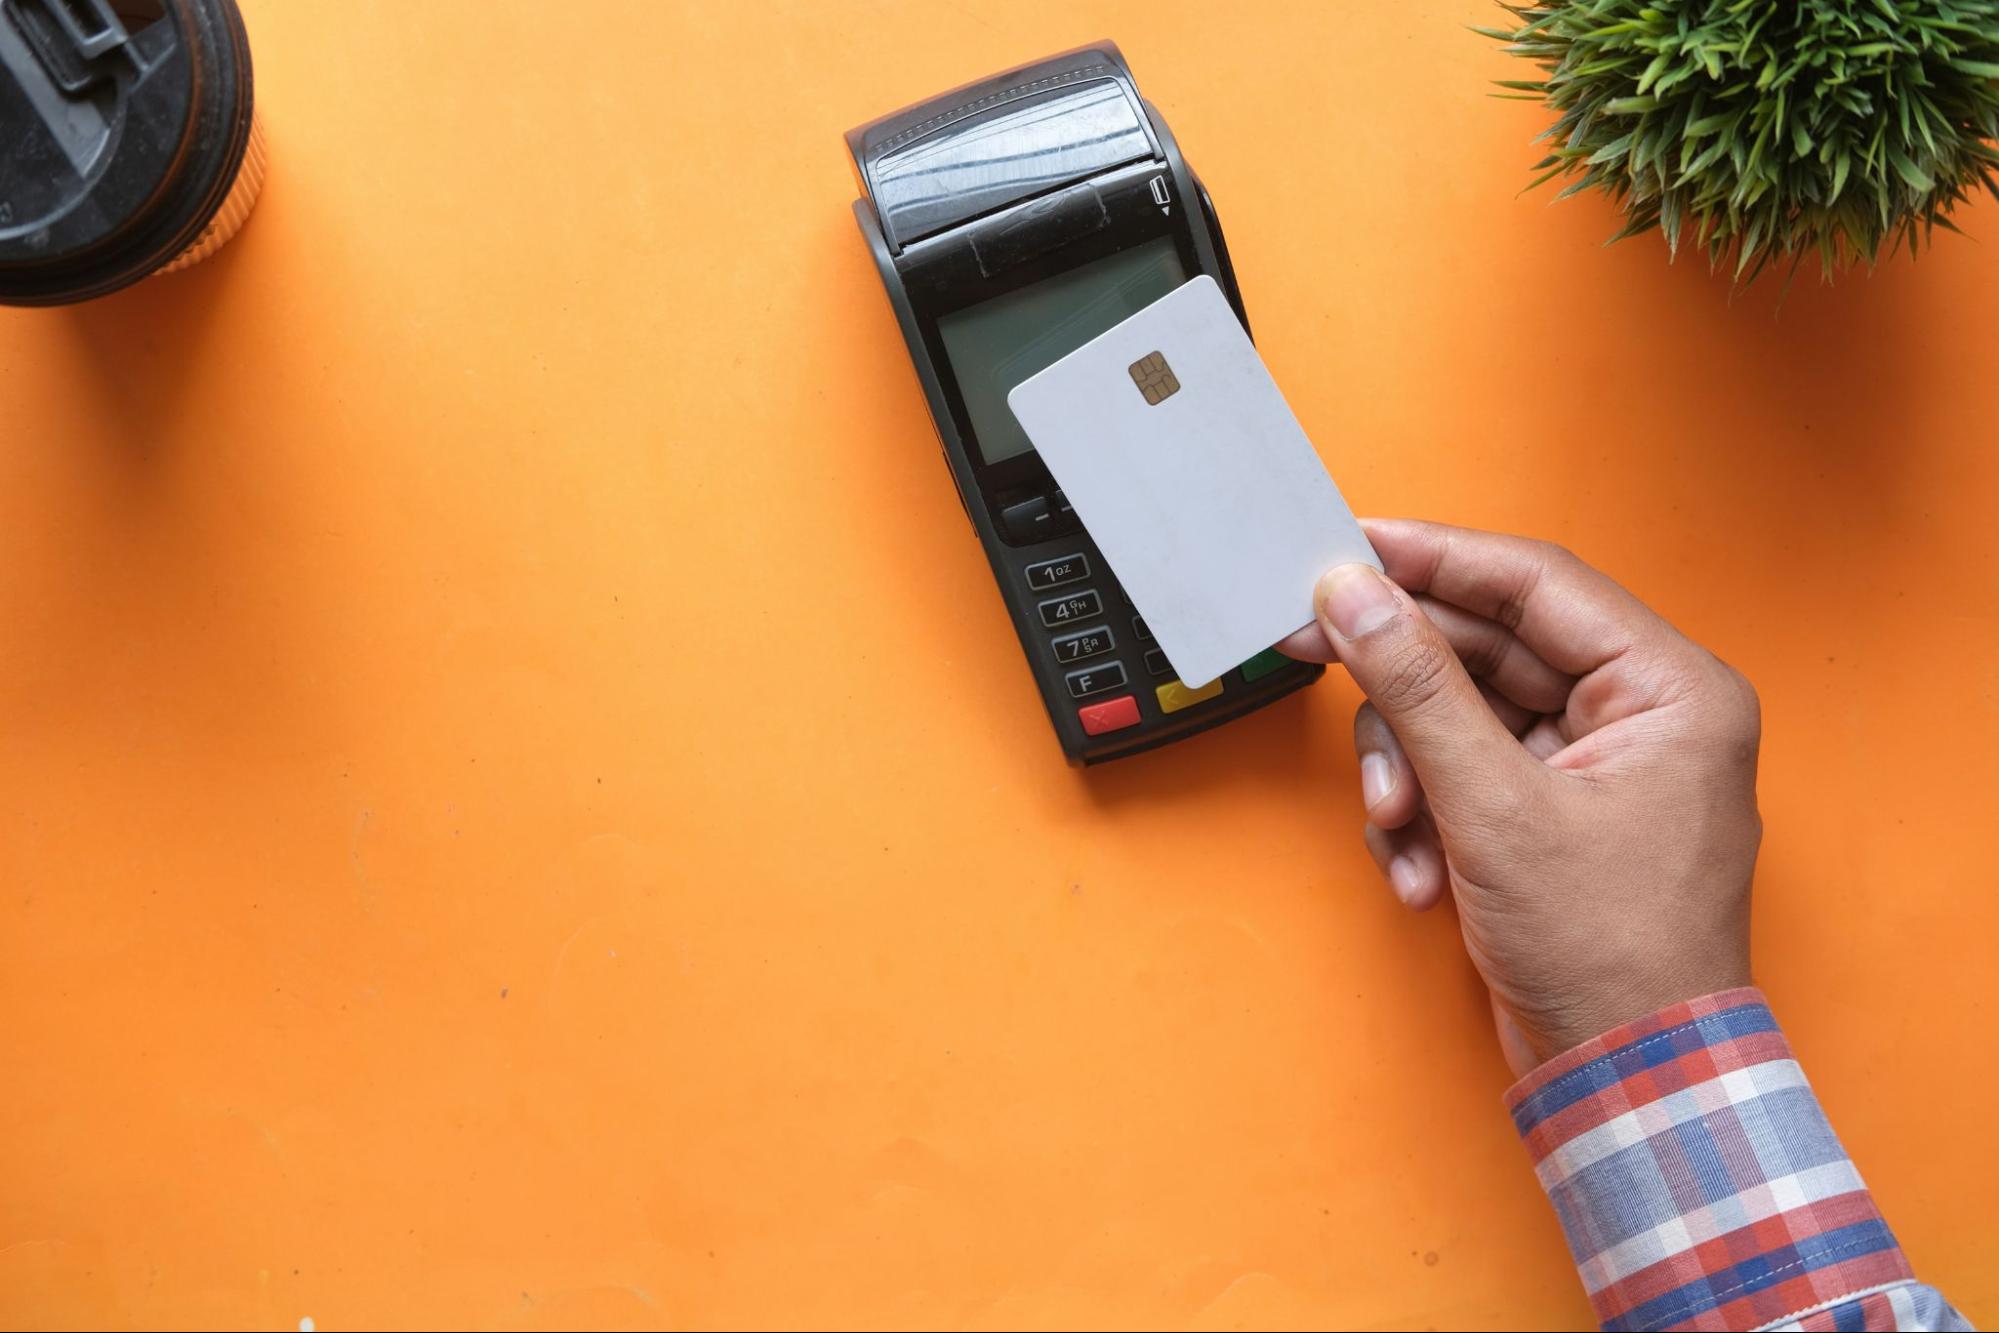  The image shows a credit card inserted into a card reader for a secure payment 